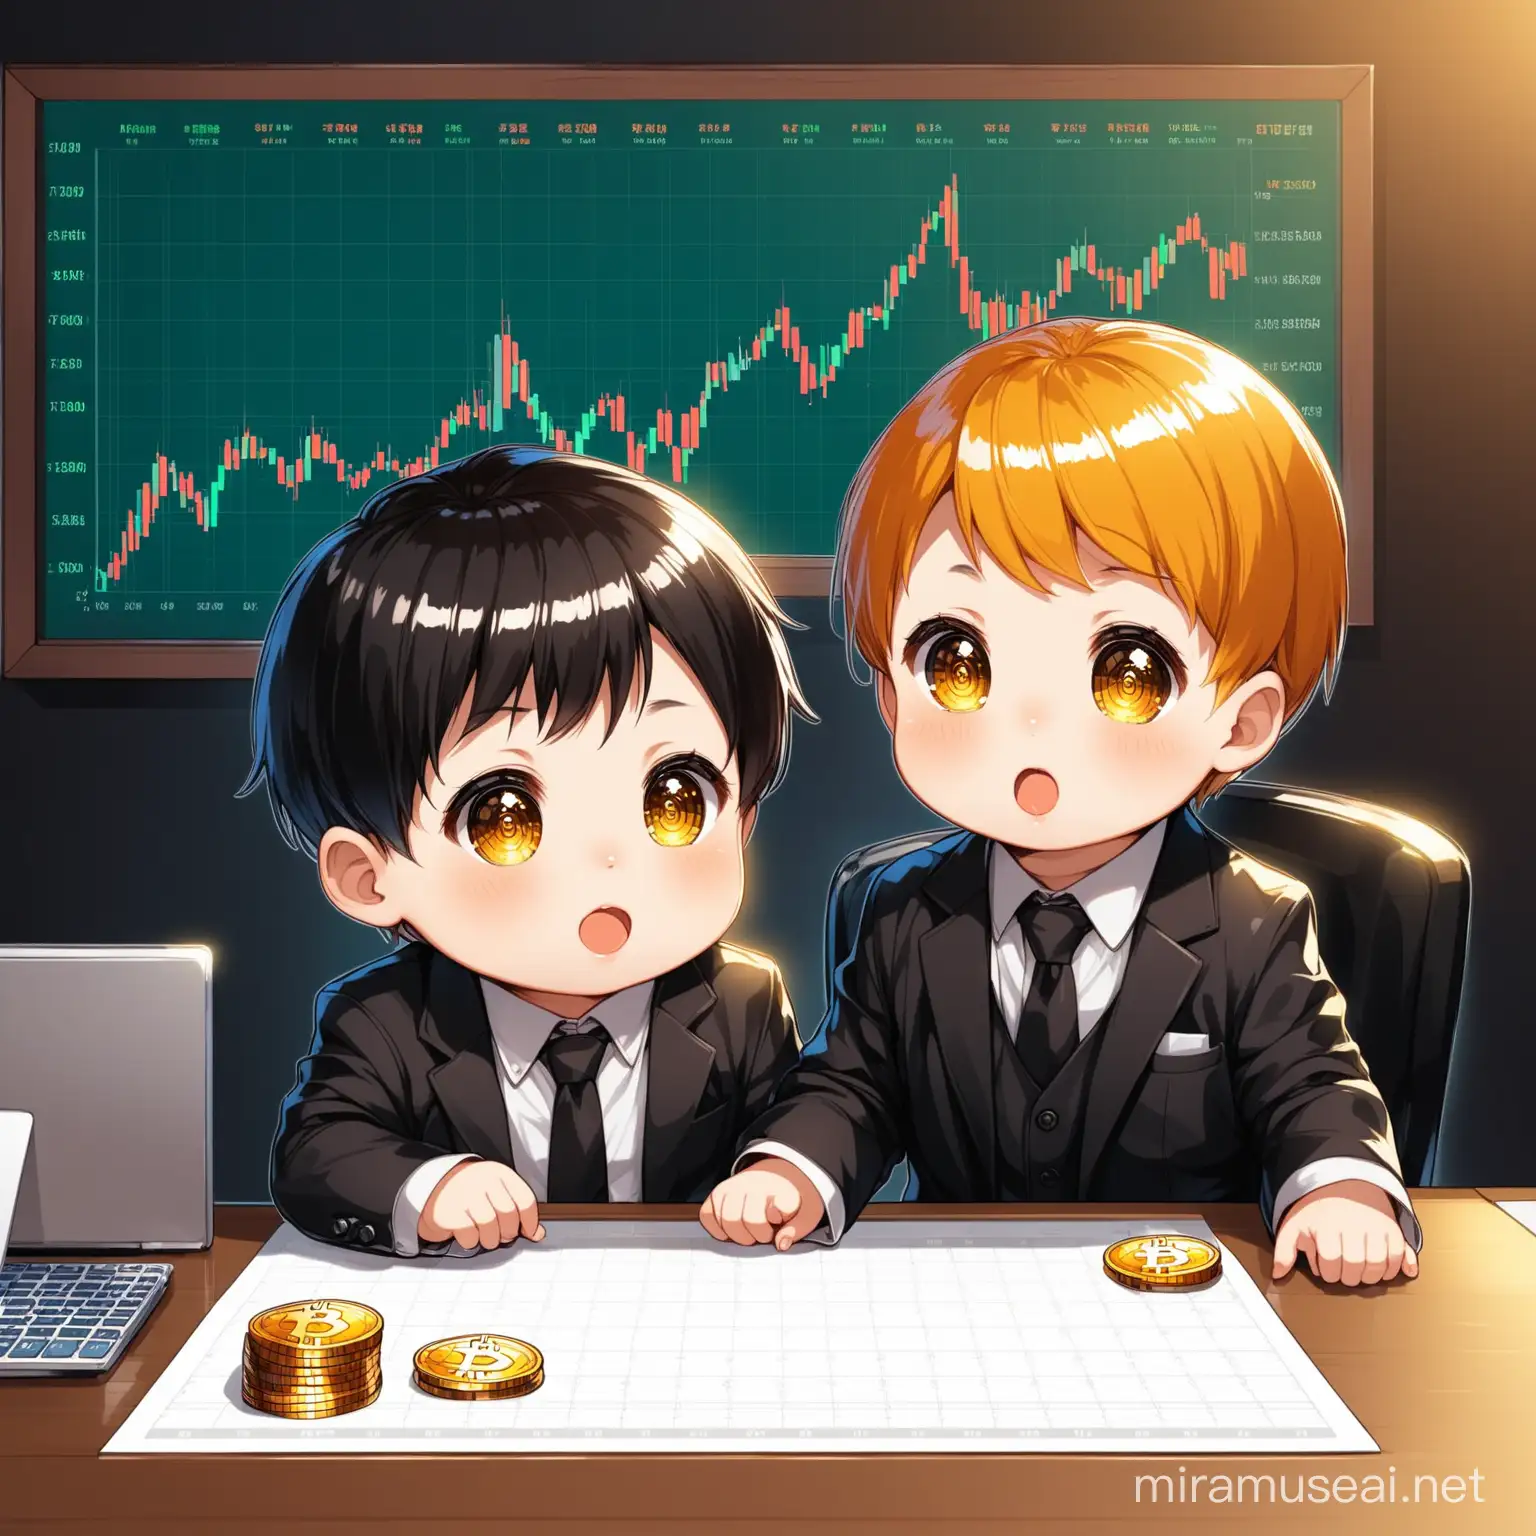 Adorable Asian Twins in Business Attire with Cryptocurrency and Stock Market Chart